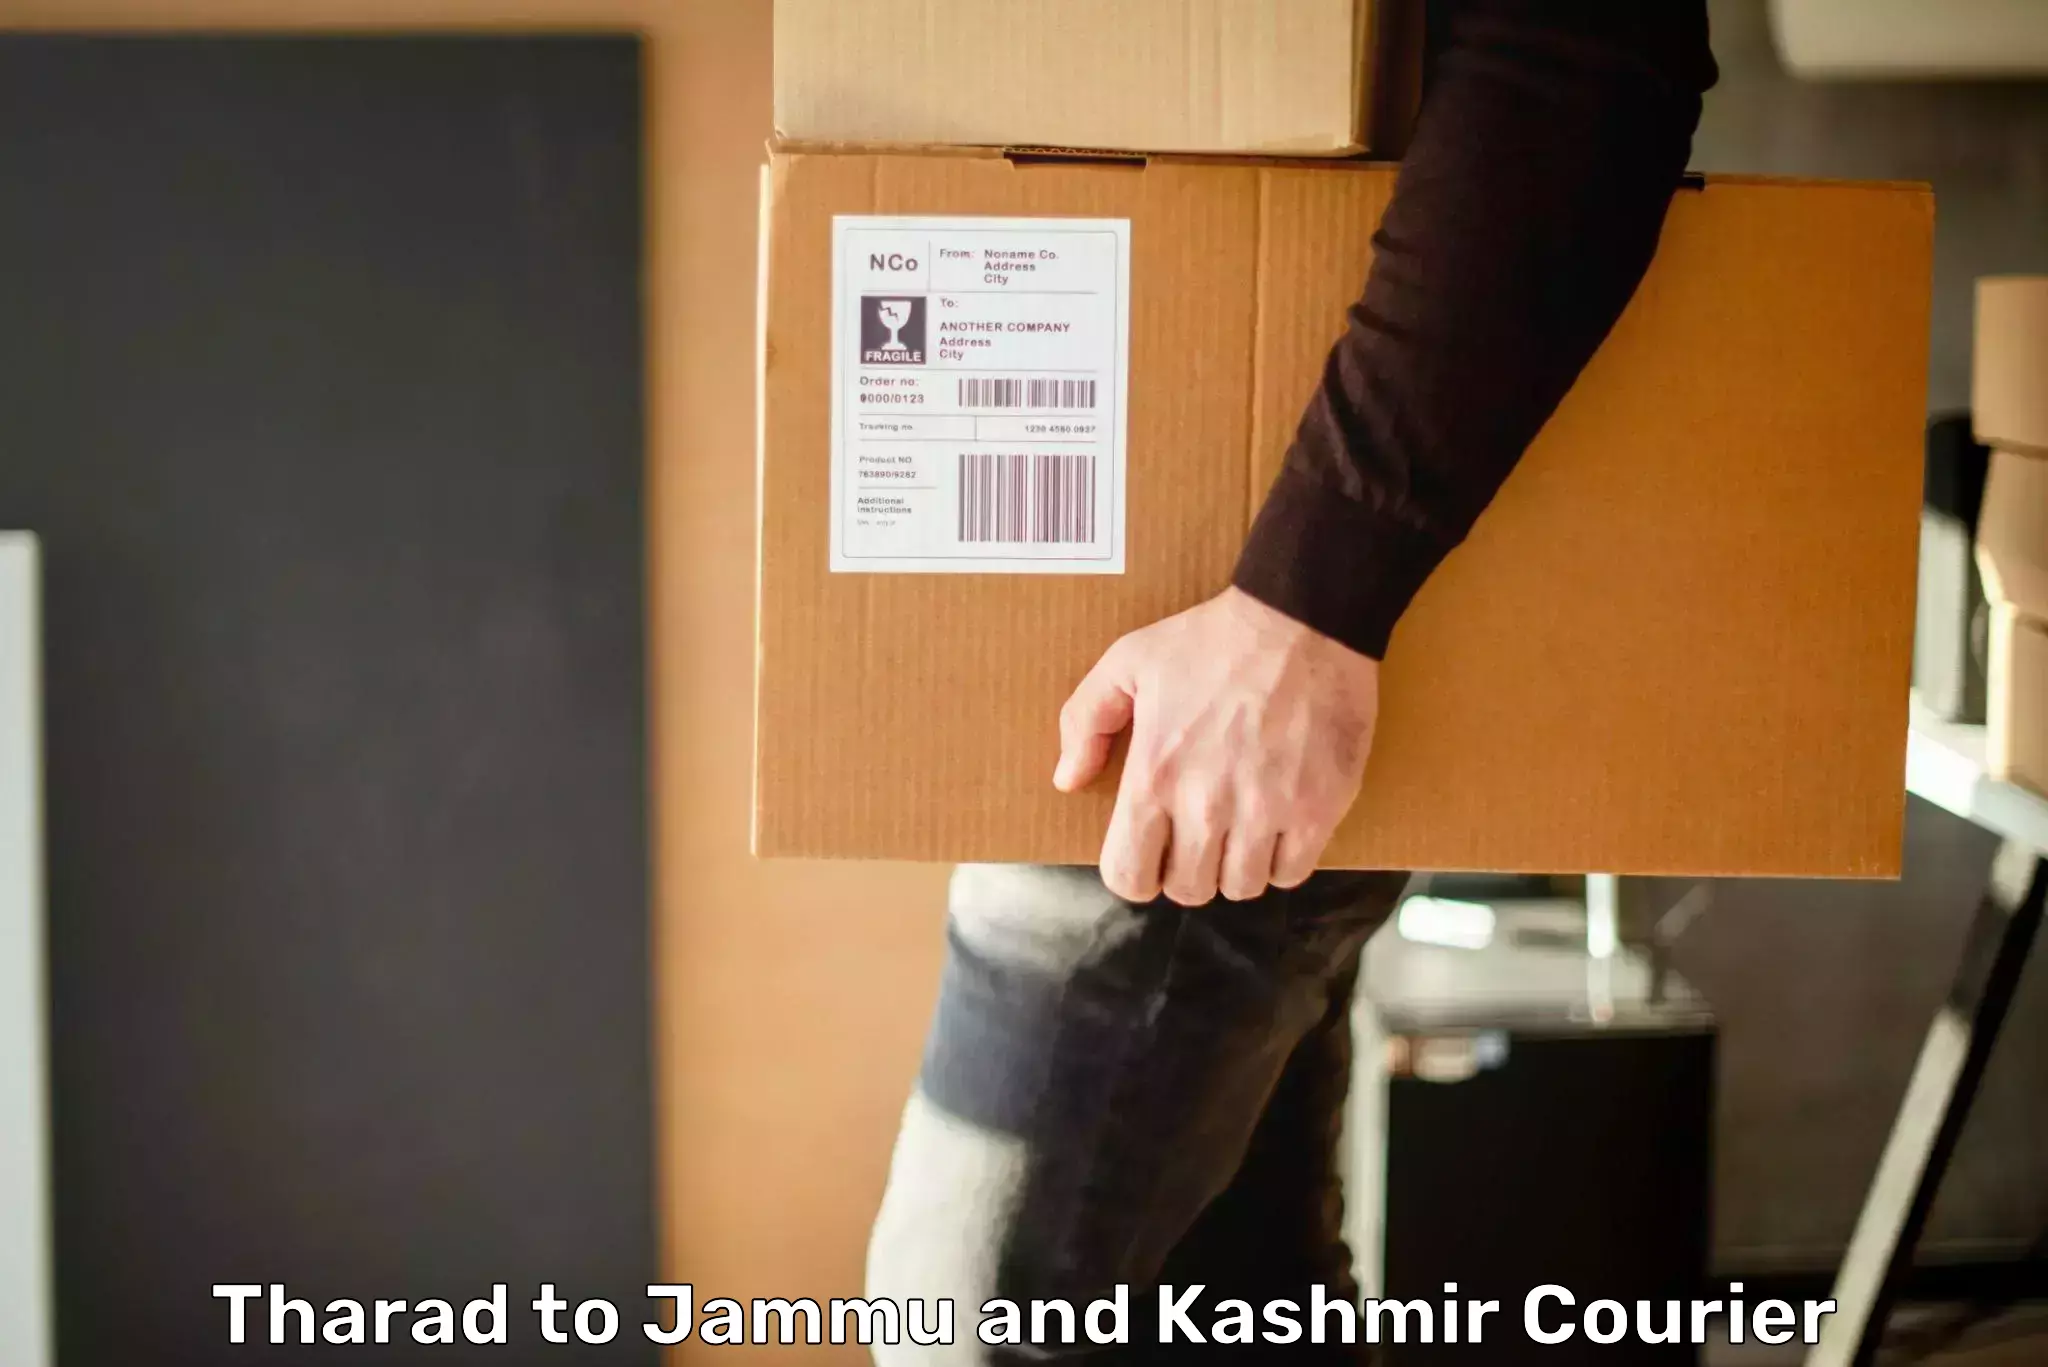 Seamless shipping service Tharad to Jammu and Kashmir